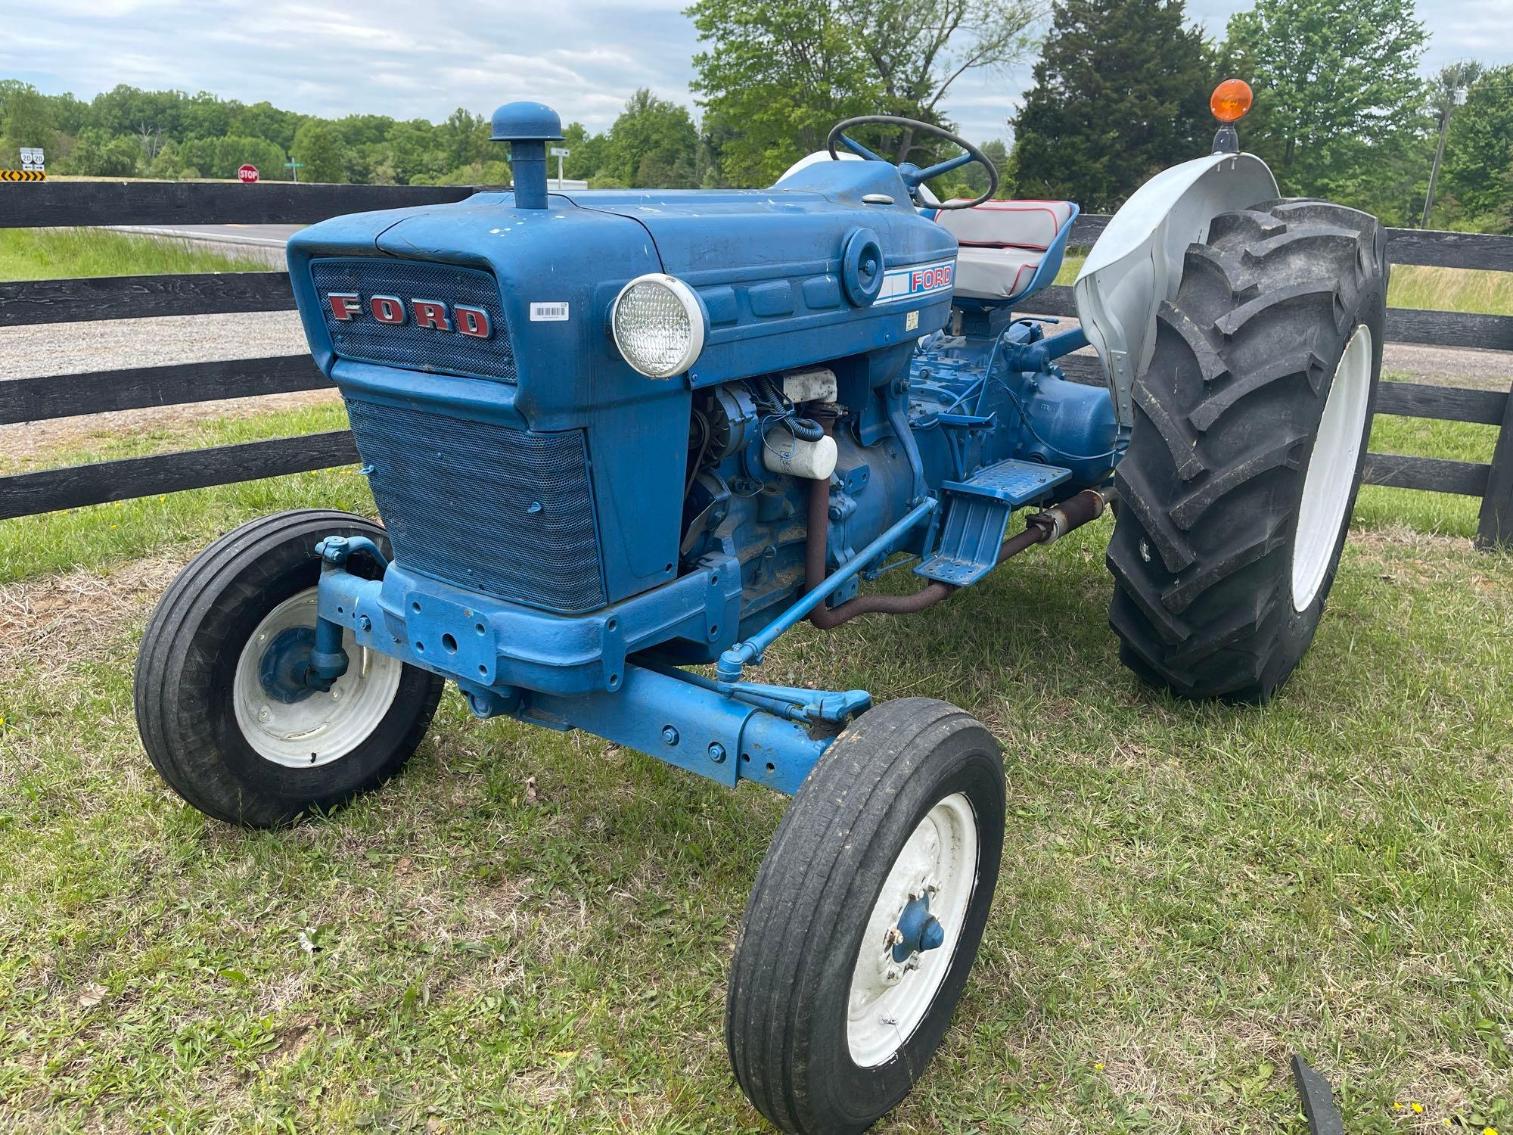 Image for 1975 Ford 4000, per seller- runs well, hour meter stopped working 2 years ago showing 1435